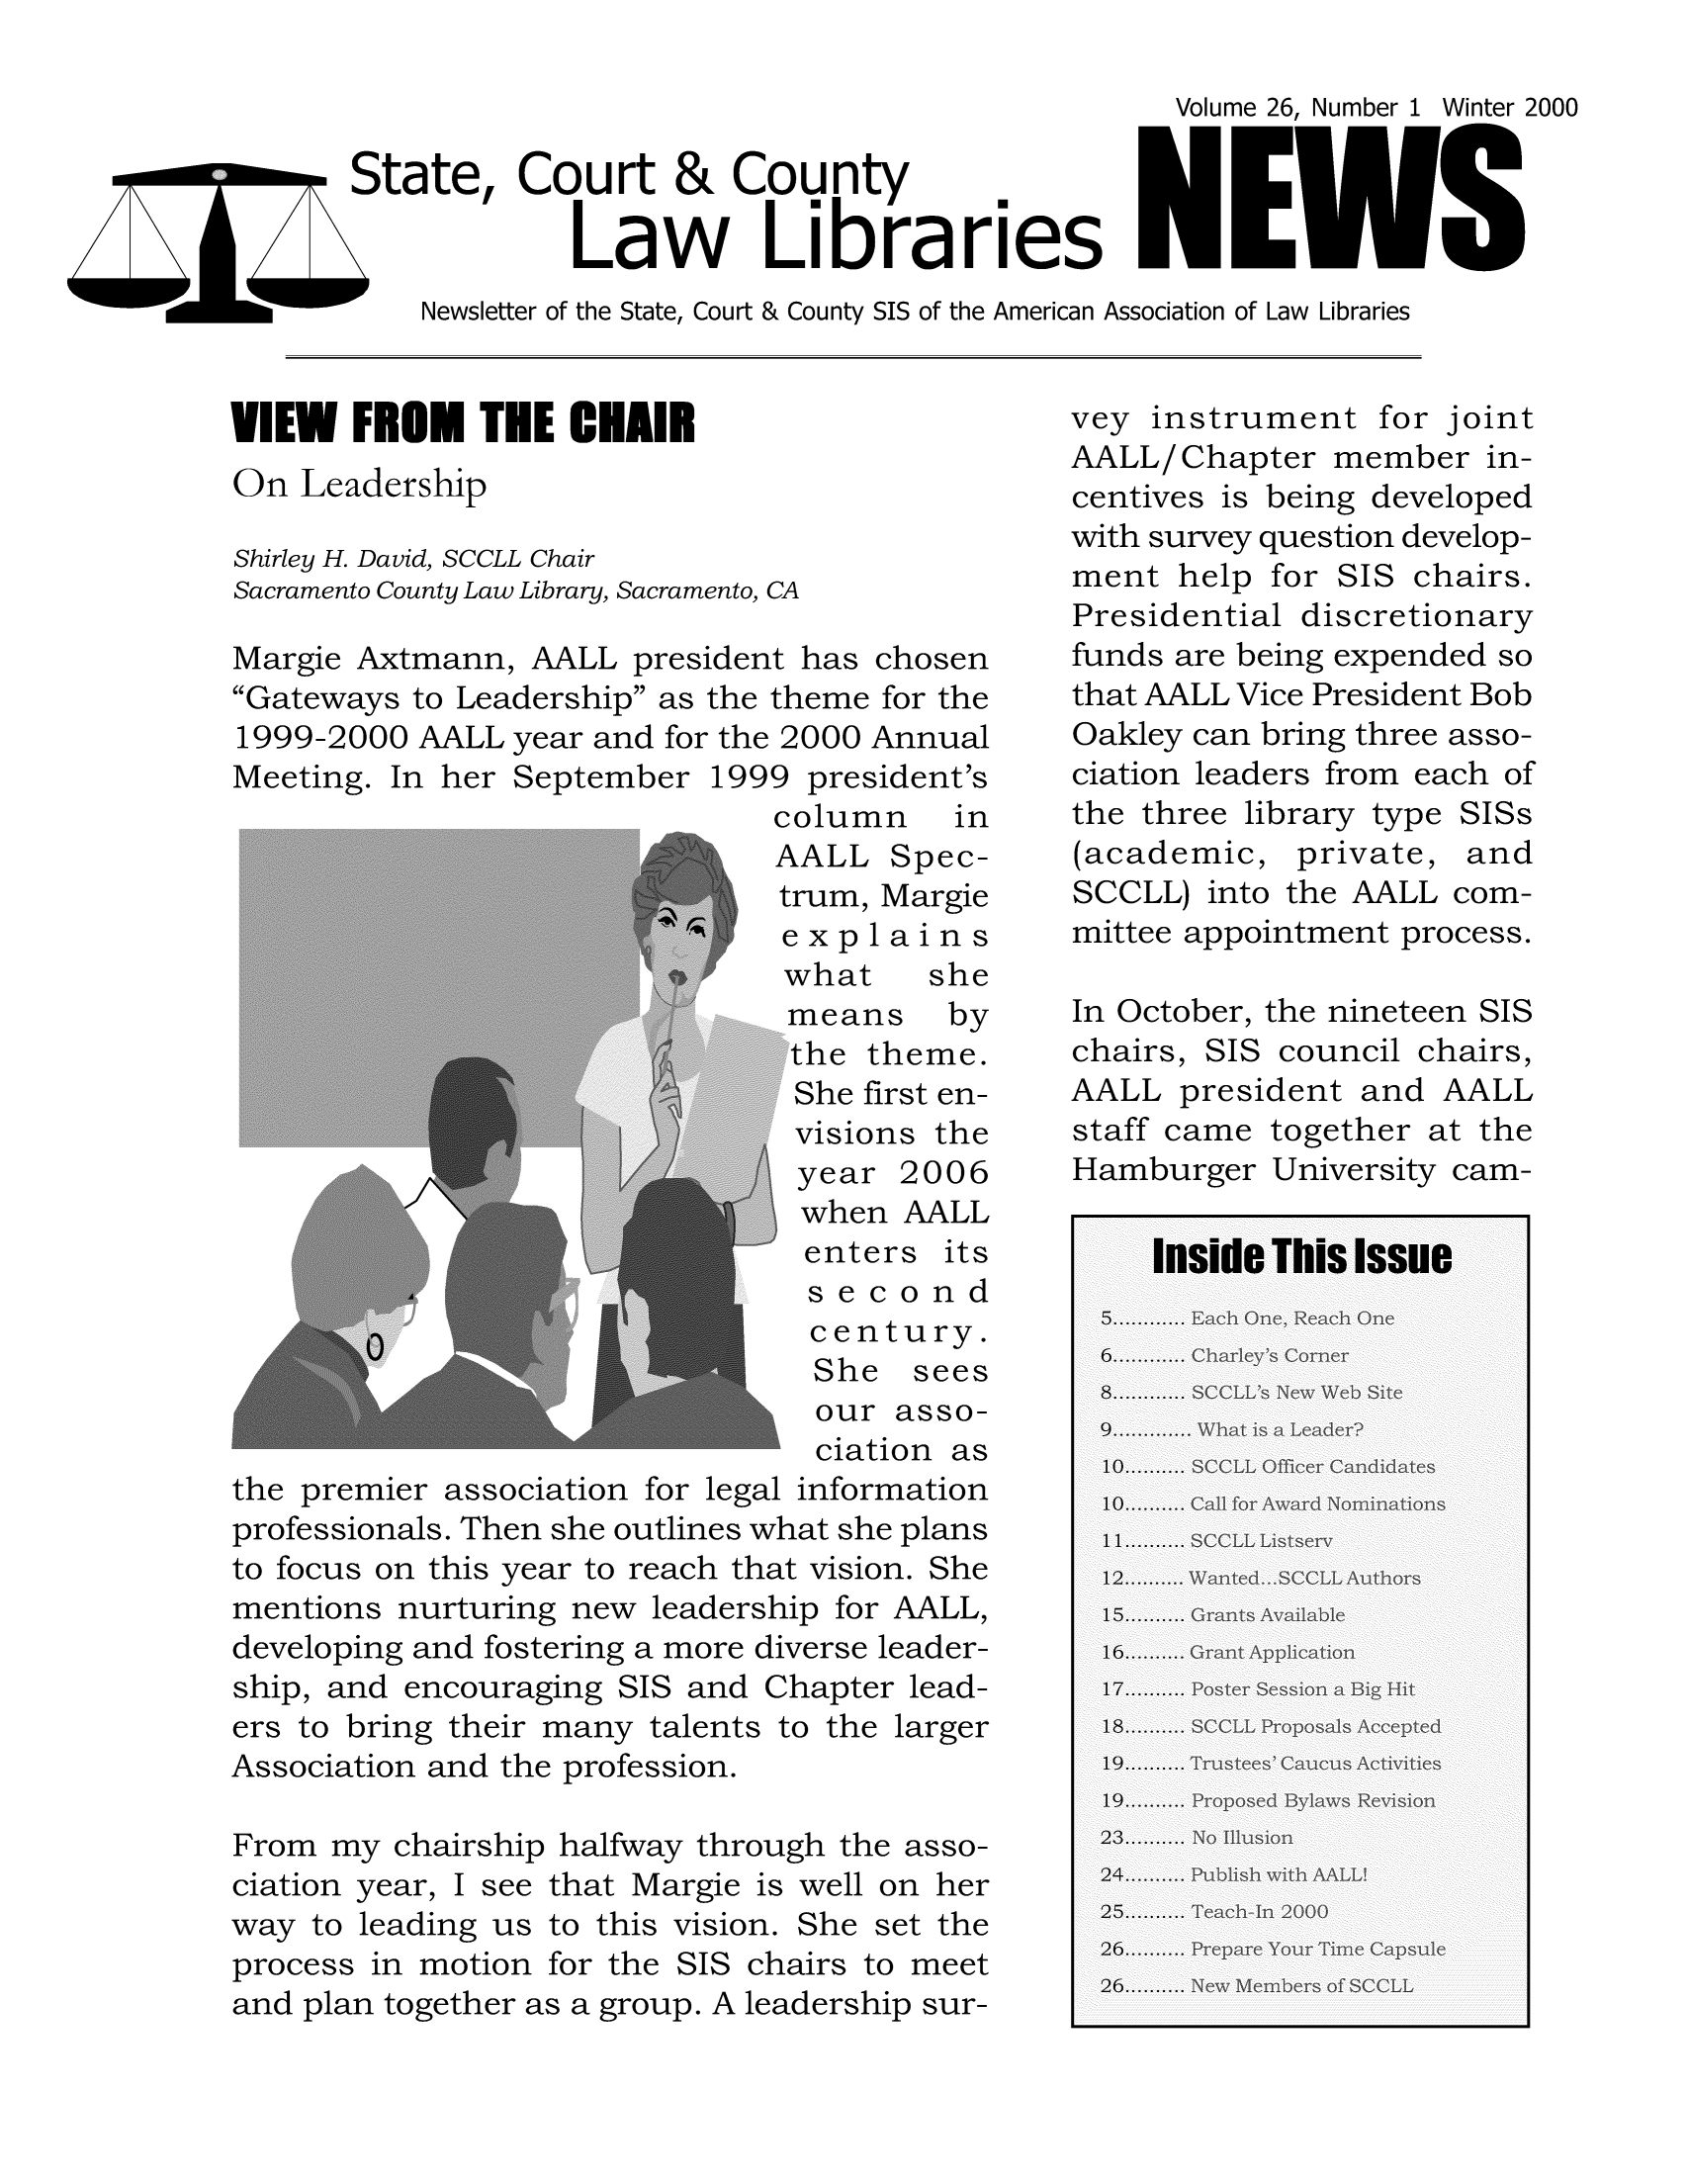 handle is hein.lbr/alsclnws0026 and id is 1 raw text is: Volume 26, Number 1 Winter 2000
State, Court & County
Law Libraries
Newsletter of the State, Court & County SIS of the American Association of Law Libraries

VIEW FROM TEE CAIn
On Leadership
Shirley H. David, SCCLL Chair
Sacramento County Law Library, Sacramento, CA

Margie Axtmann, AALL president has chosen
Gateways to Leadership as the theme for the
1999-2000 AALL year and for the 2000 Annual
Meeting. In her September 1999 president's
column    in
AALL Spec-
trum, Margie
explains
what    she
means    by
the theme.
She first en-
visions the
year 2006
when AALL
enters its
second
century.
She sees
our asso-
ciation as
the premier association for legal information
professionals. Then she outlines what she plans
to focus on this year to reach that vision. She
mentions nurturing new leadership for AALL,
developing and fostering a more diverse leader-
ship, and encouraging SIS and Chapter lead-
ers to bring their many talents to the larger
Association and the profession.
From my chairship halfway through the asso-
ciation year, I see that Margie is well on her
way to leading us to this vision. She set the
process in motion for the SIS chairs to meet
and plan together as a group. A leadership sur-

vey instrument for joint
AALL/Chapter member in-
centives is being developed
with survey question develop-
ment help for SIS chairs.
Presidential discretionary
funds are being expended so
that AALL Vice President Bob
Oakley can bring three asso-
ciation leaders from each of
the three library type SISs
(academic, private, and
SCCLL) into the AALL com-
mittee appointment process.
In October, the nineteen SIS
chairs, SIS council chairs,
AALL president and AALL
staff came together at the
Hamburger University cam-


